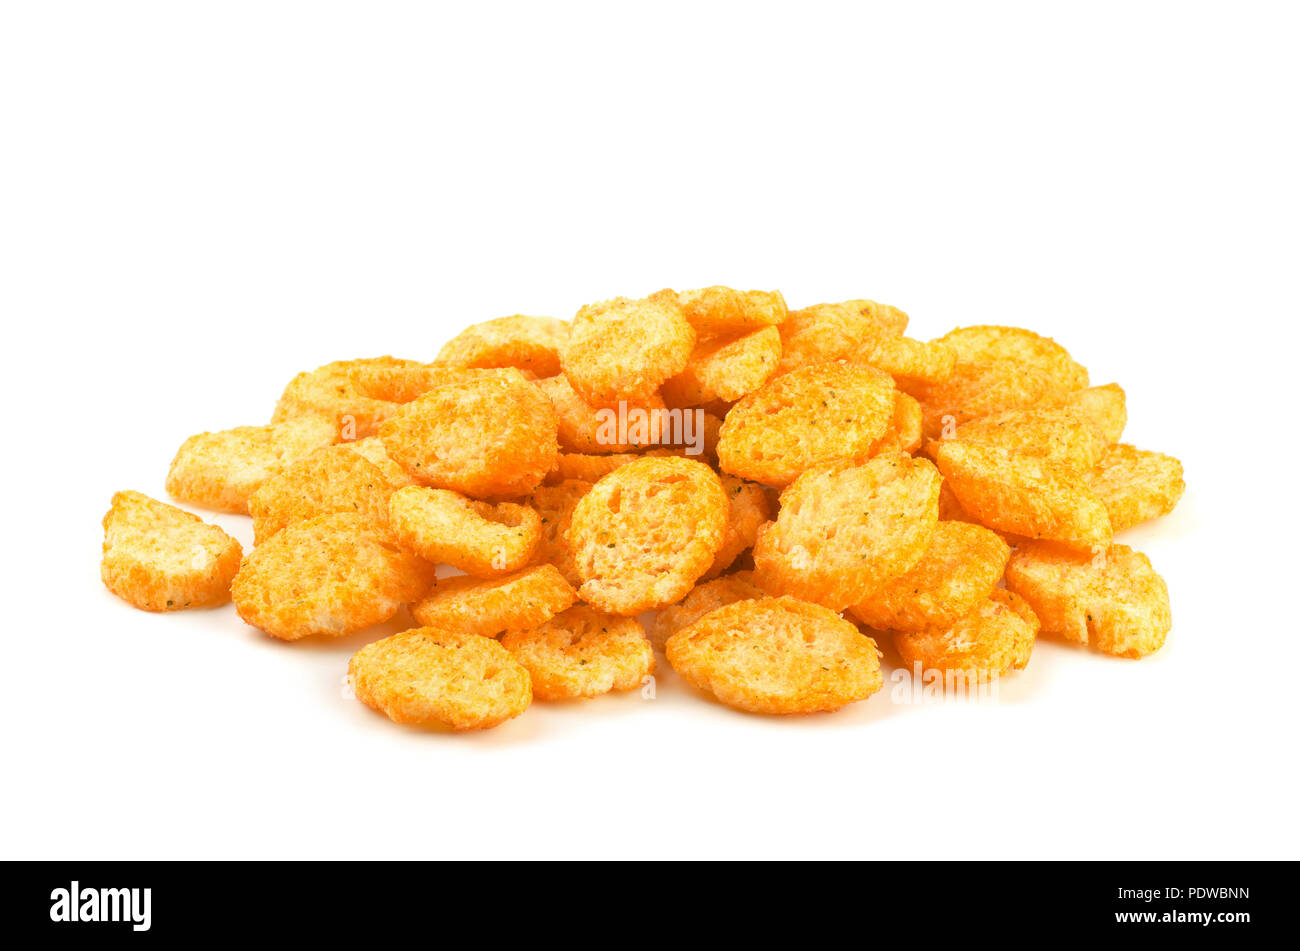 Pile of seasoned bread croutons sticks isolated over the white background Stock Photo